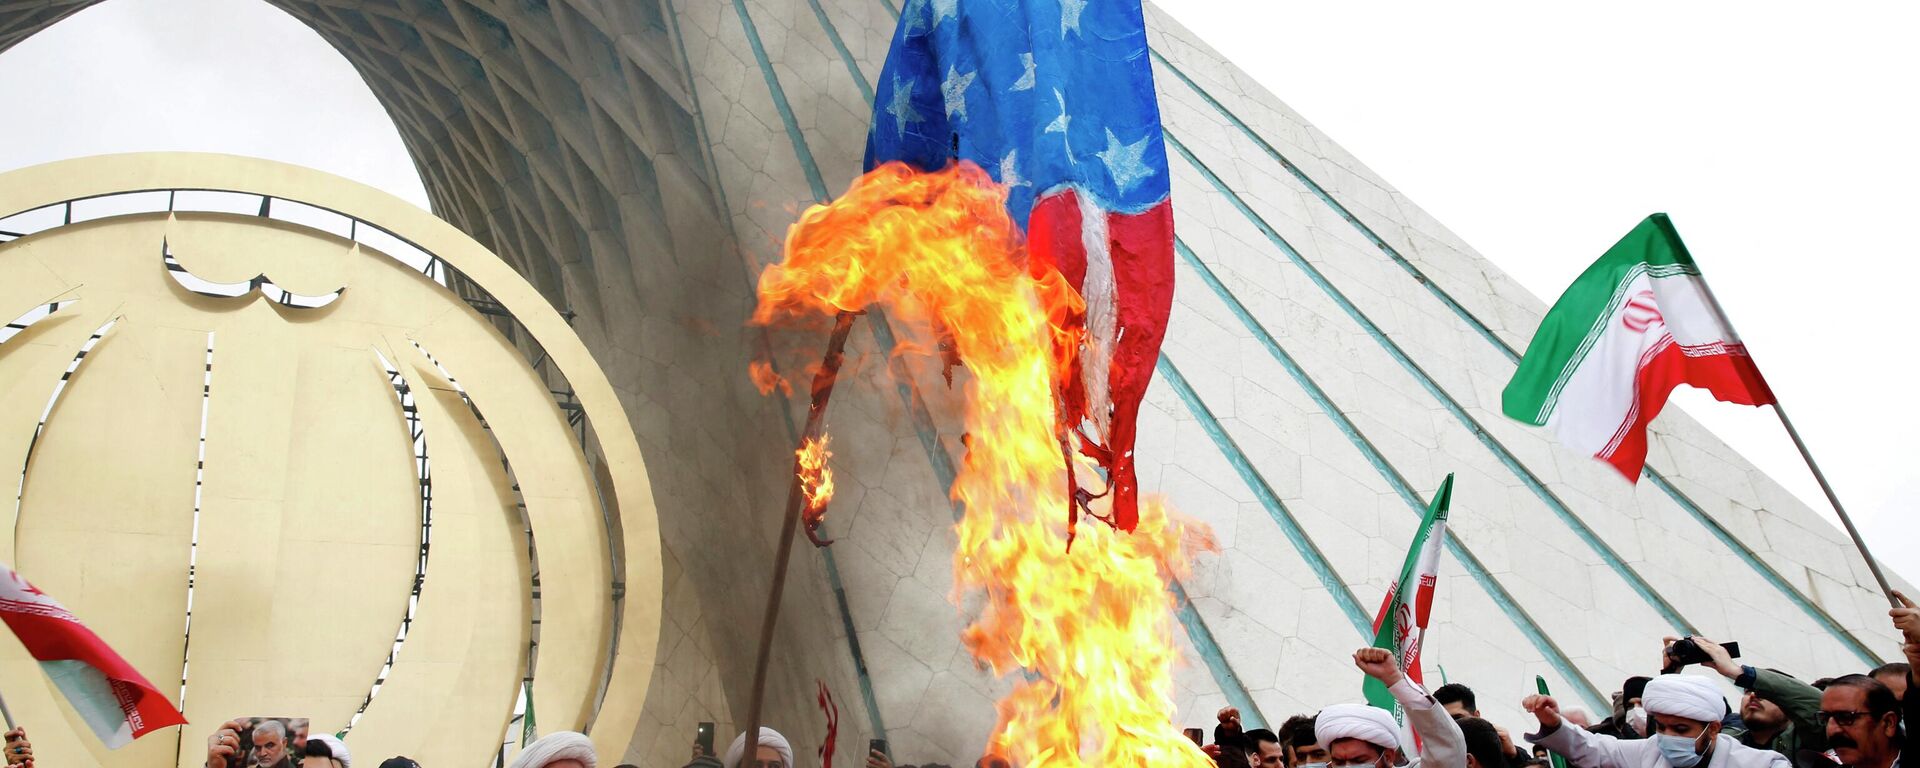 Iranian clerics burn US flags during a rally marking the 43rd anniversary of the 1979 Islamic Revolution, at the Azadi (Freedom) square in Tehran, on February 11, 2022 - Sputnik International, 1920, 17.07.2022